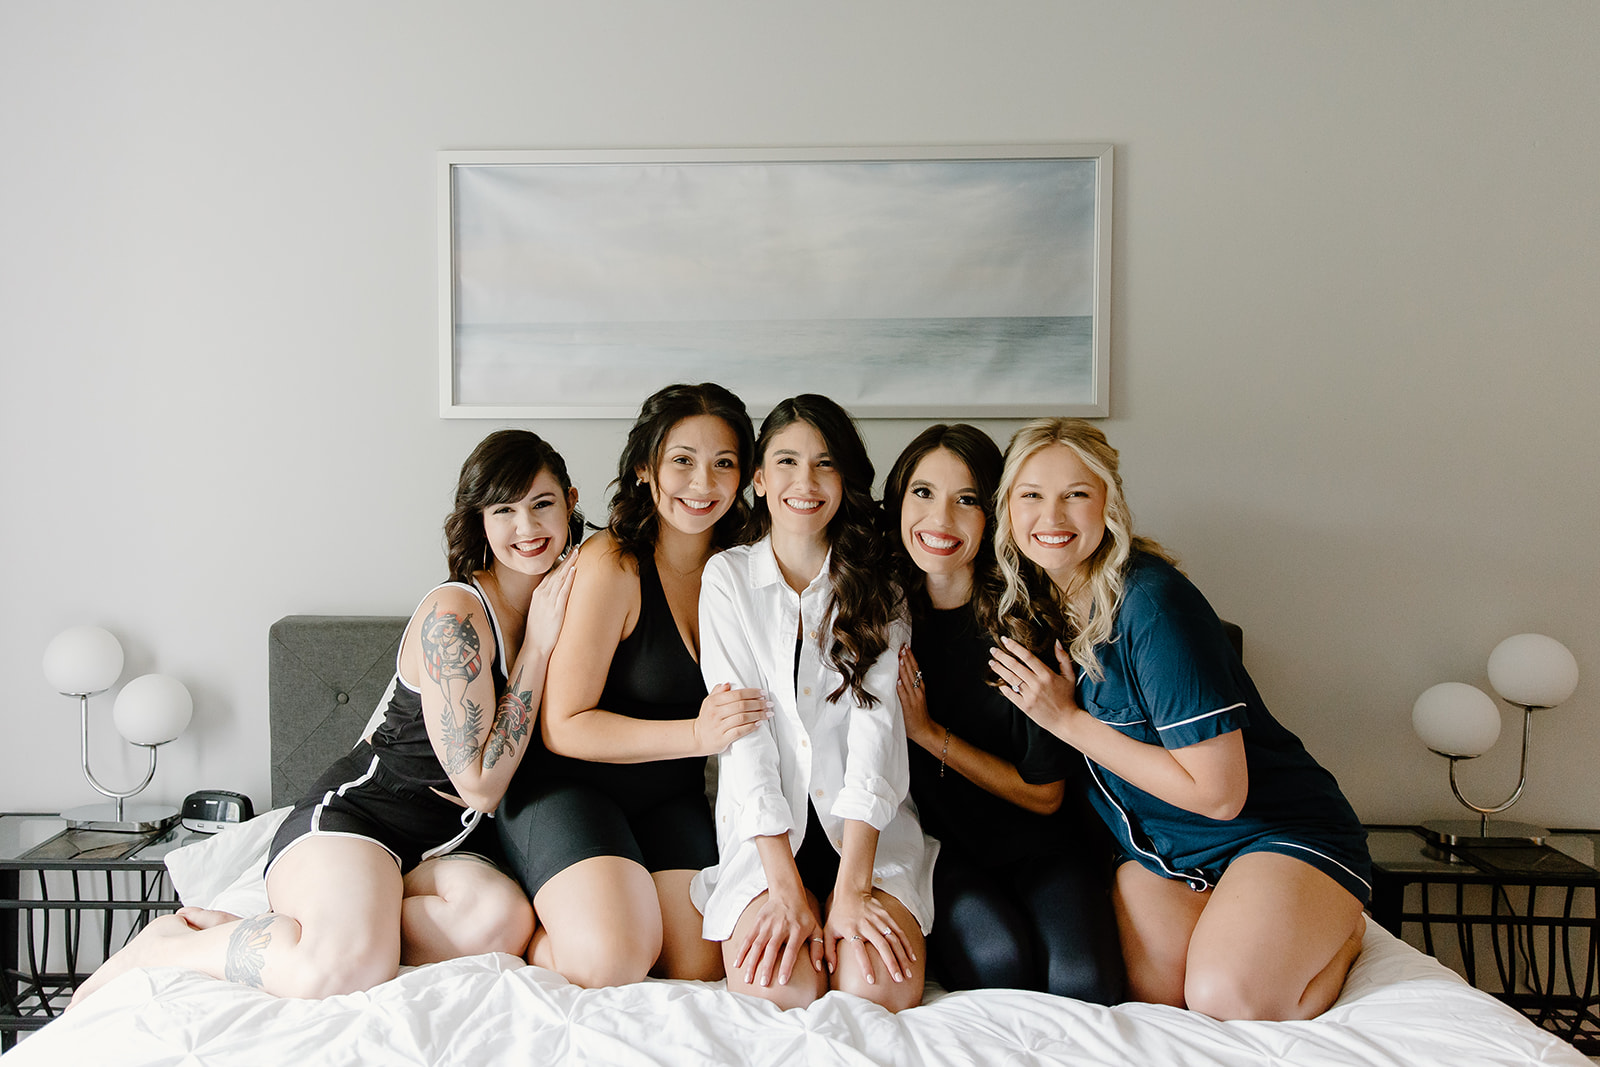 Bride and her friends smiling while sitting on a bed